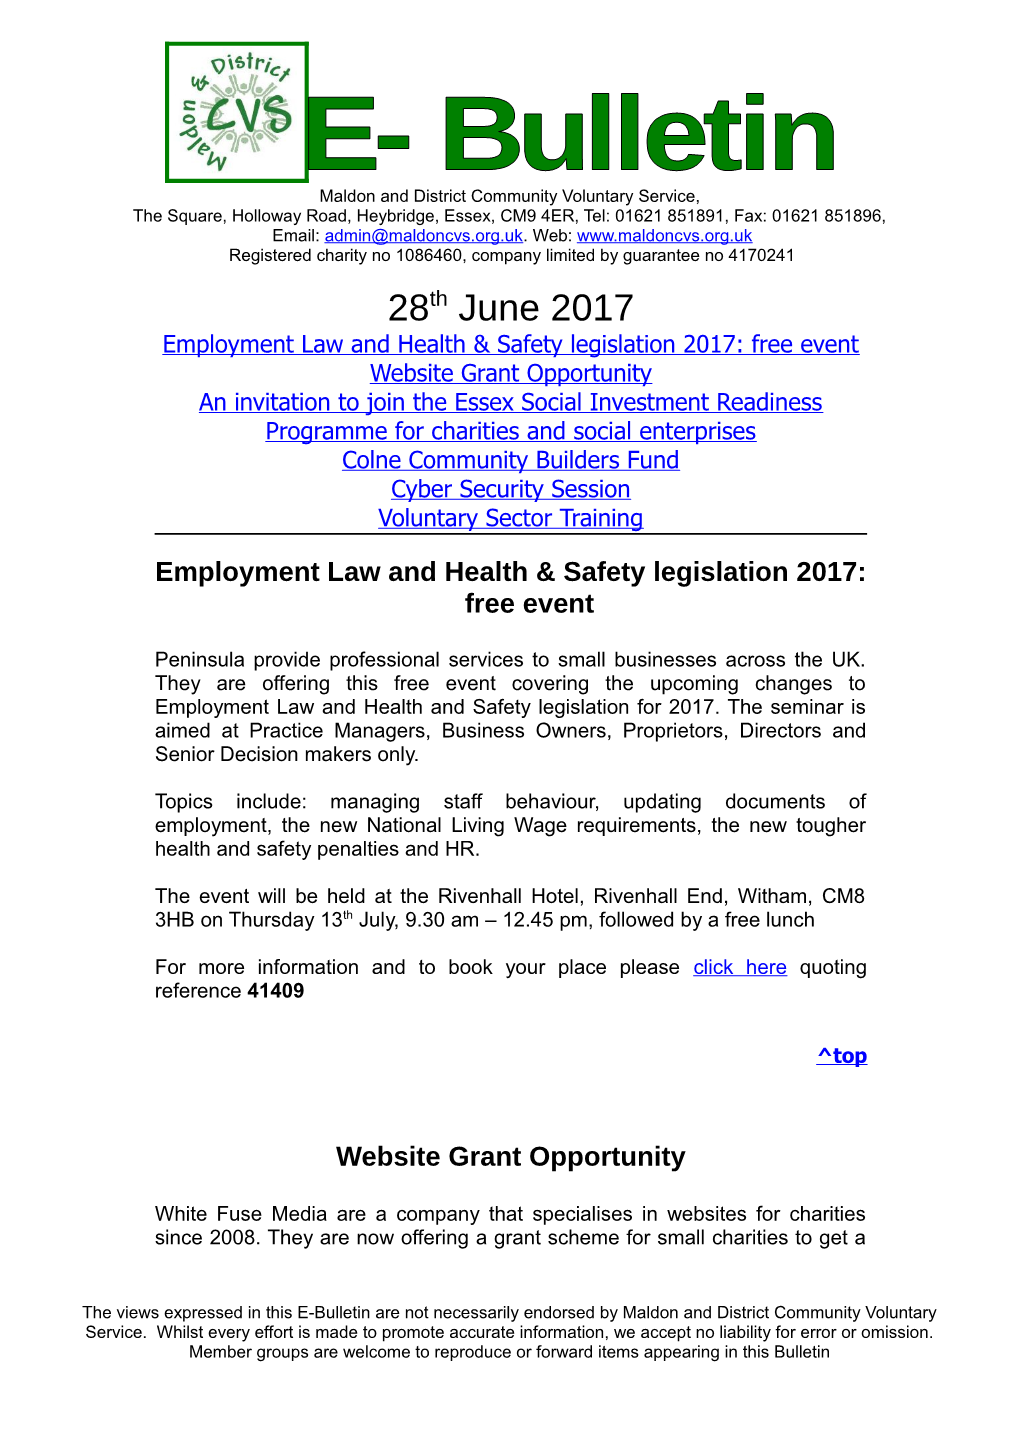 Employment Law and Health & Safety Legislation 2017: Free Event